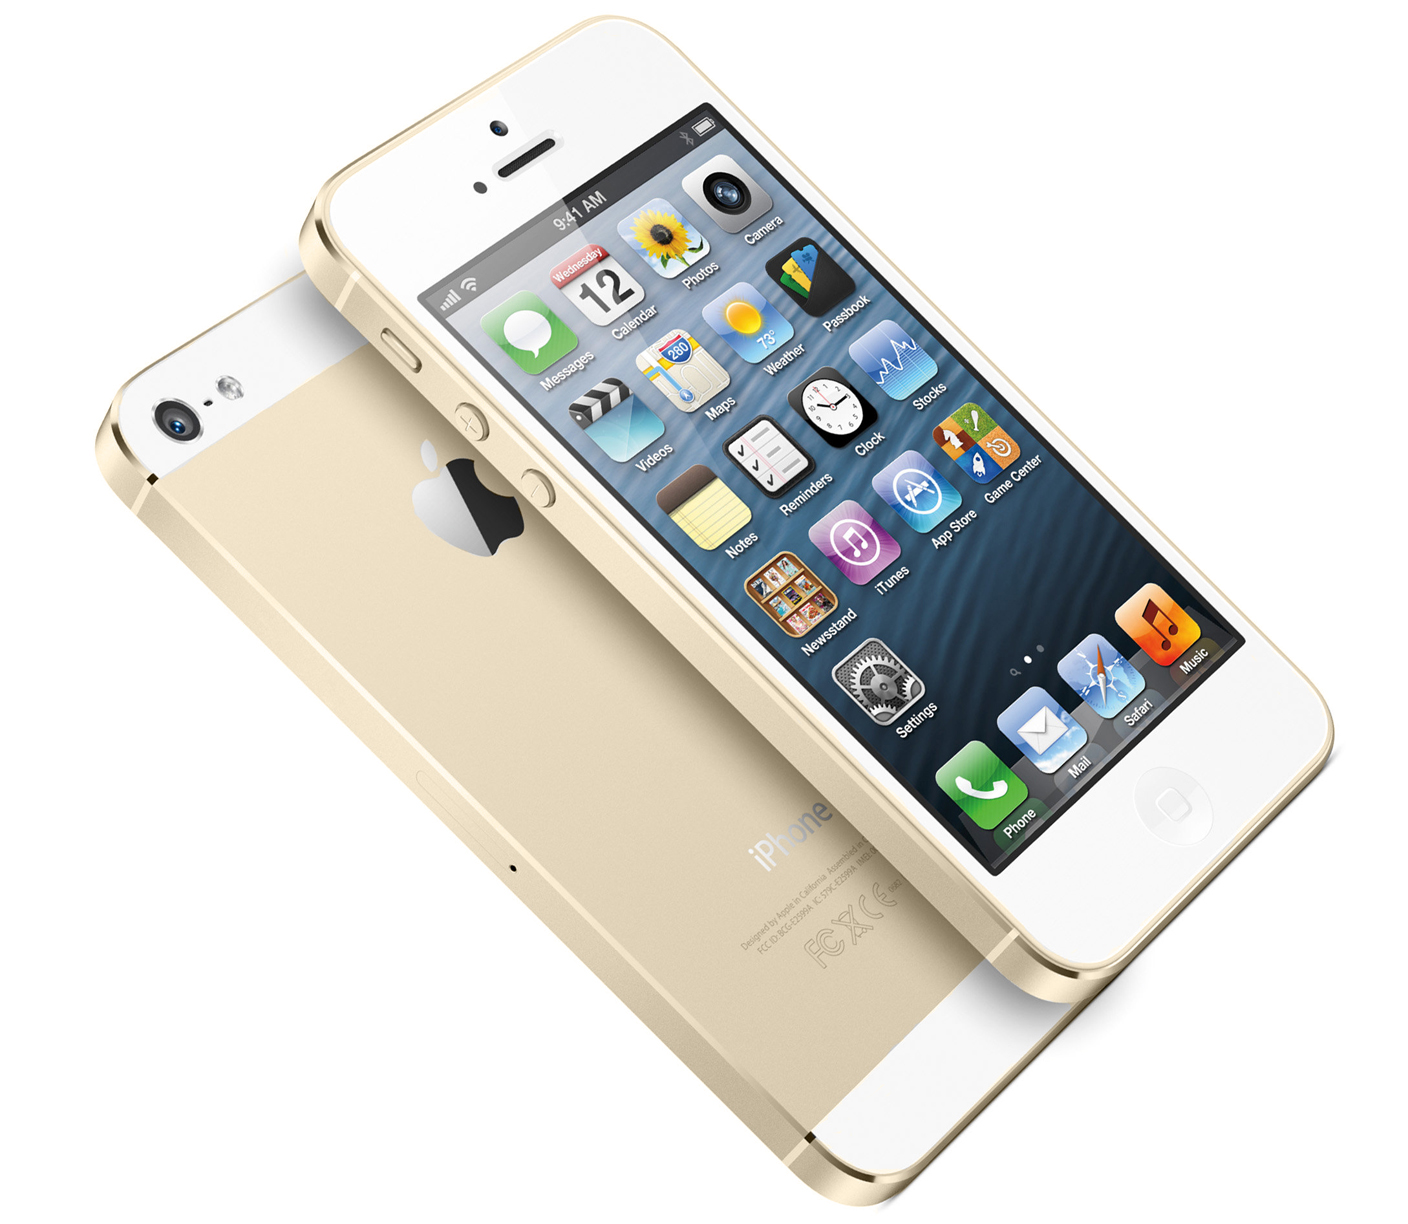 Find the serial number or IMEI on your iPhone, iPad or iPod touch